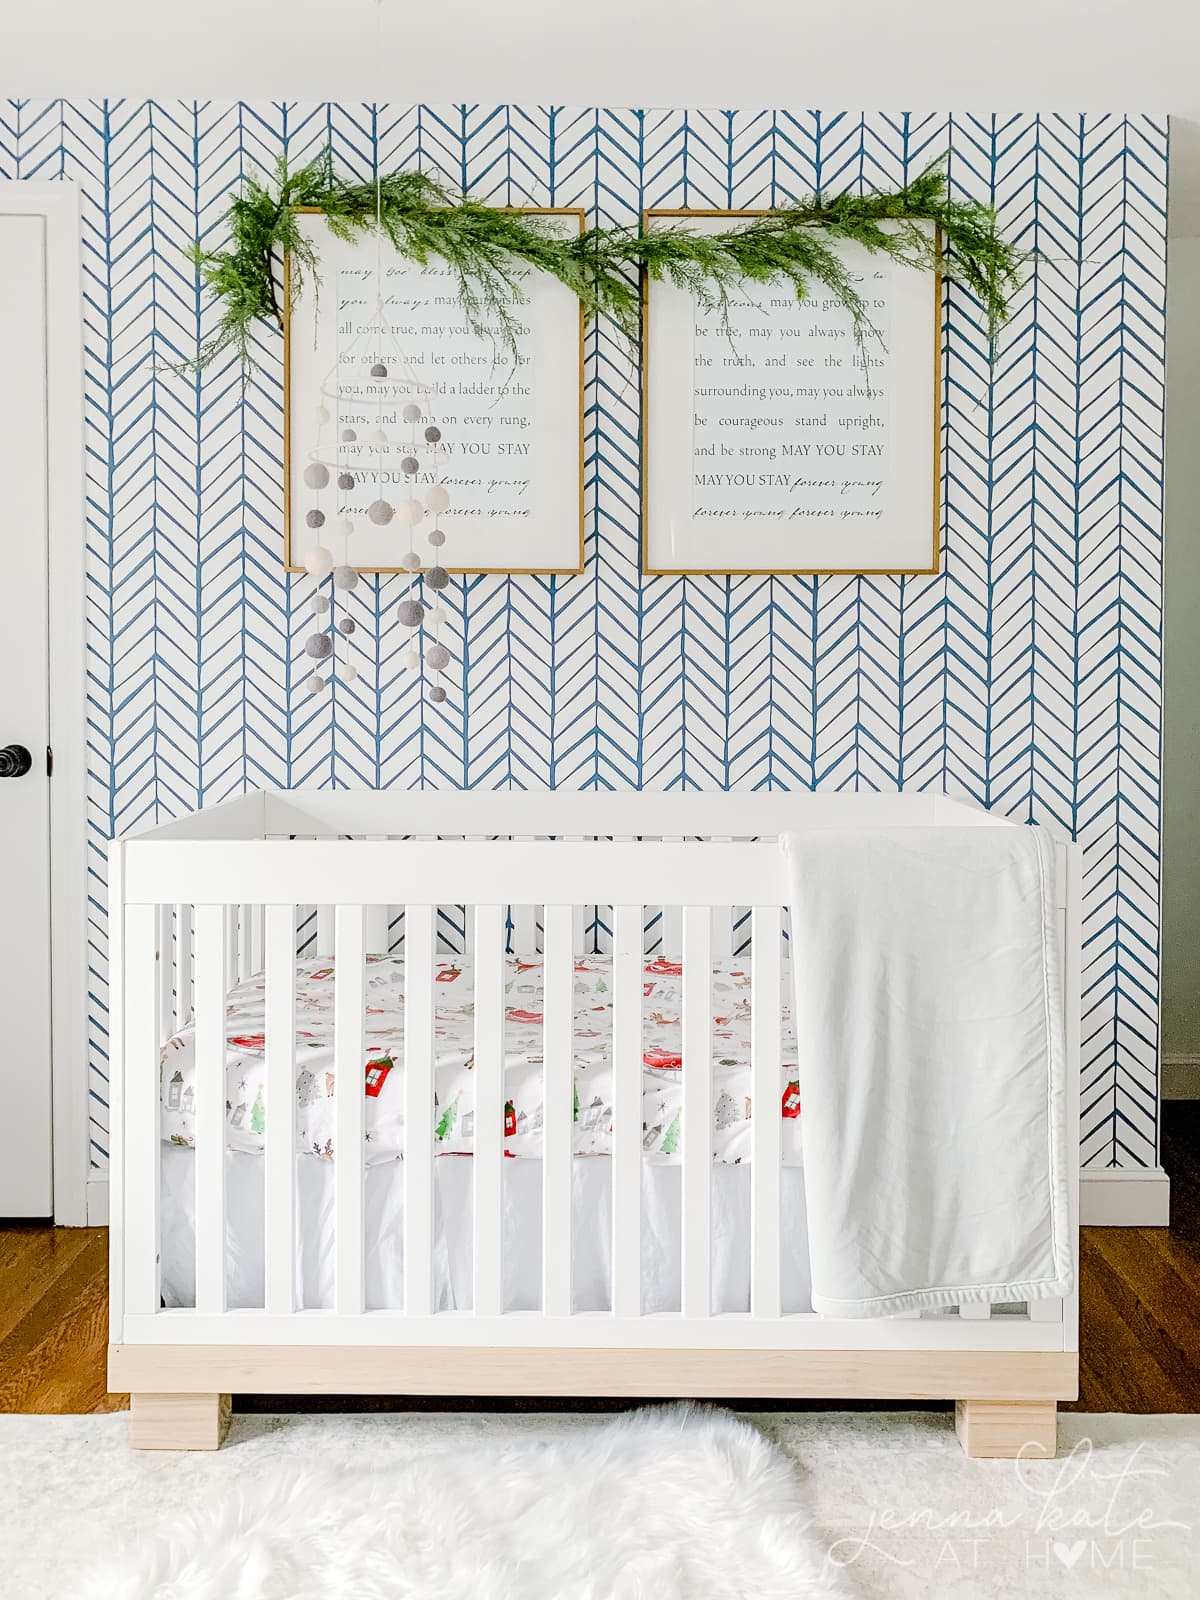 Nursery with blue wallpaper and garland hanging on the picture frames over the crib